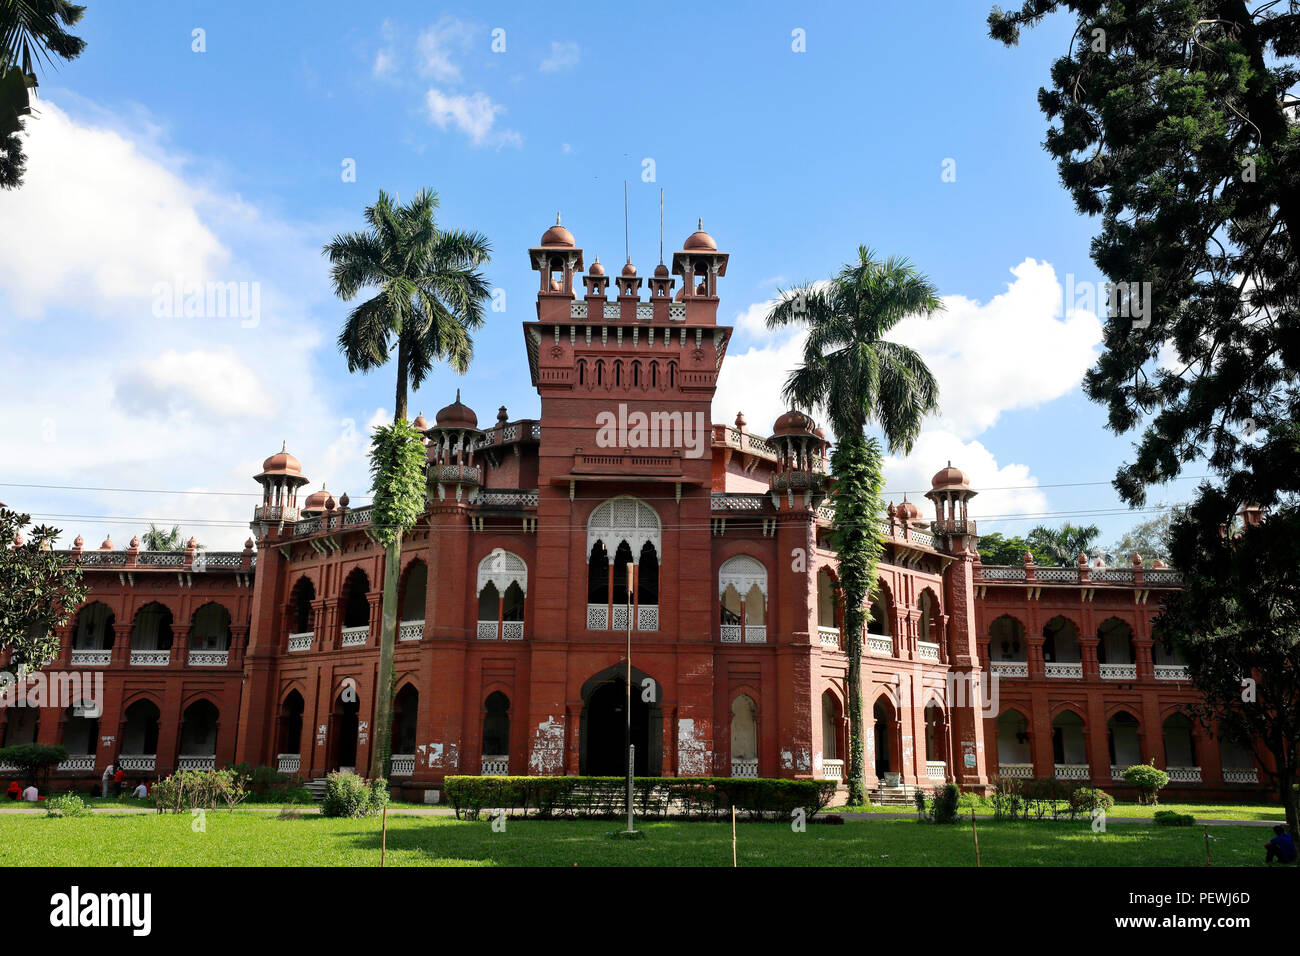 Dhaka, Bangladesh - August 15, 2018: The Curzon Hall is a British Raj-era building and home of the Faculty of Science at the University of Dhaka. The  Stock Photo